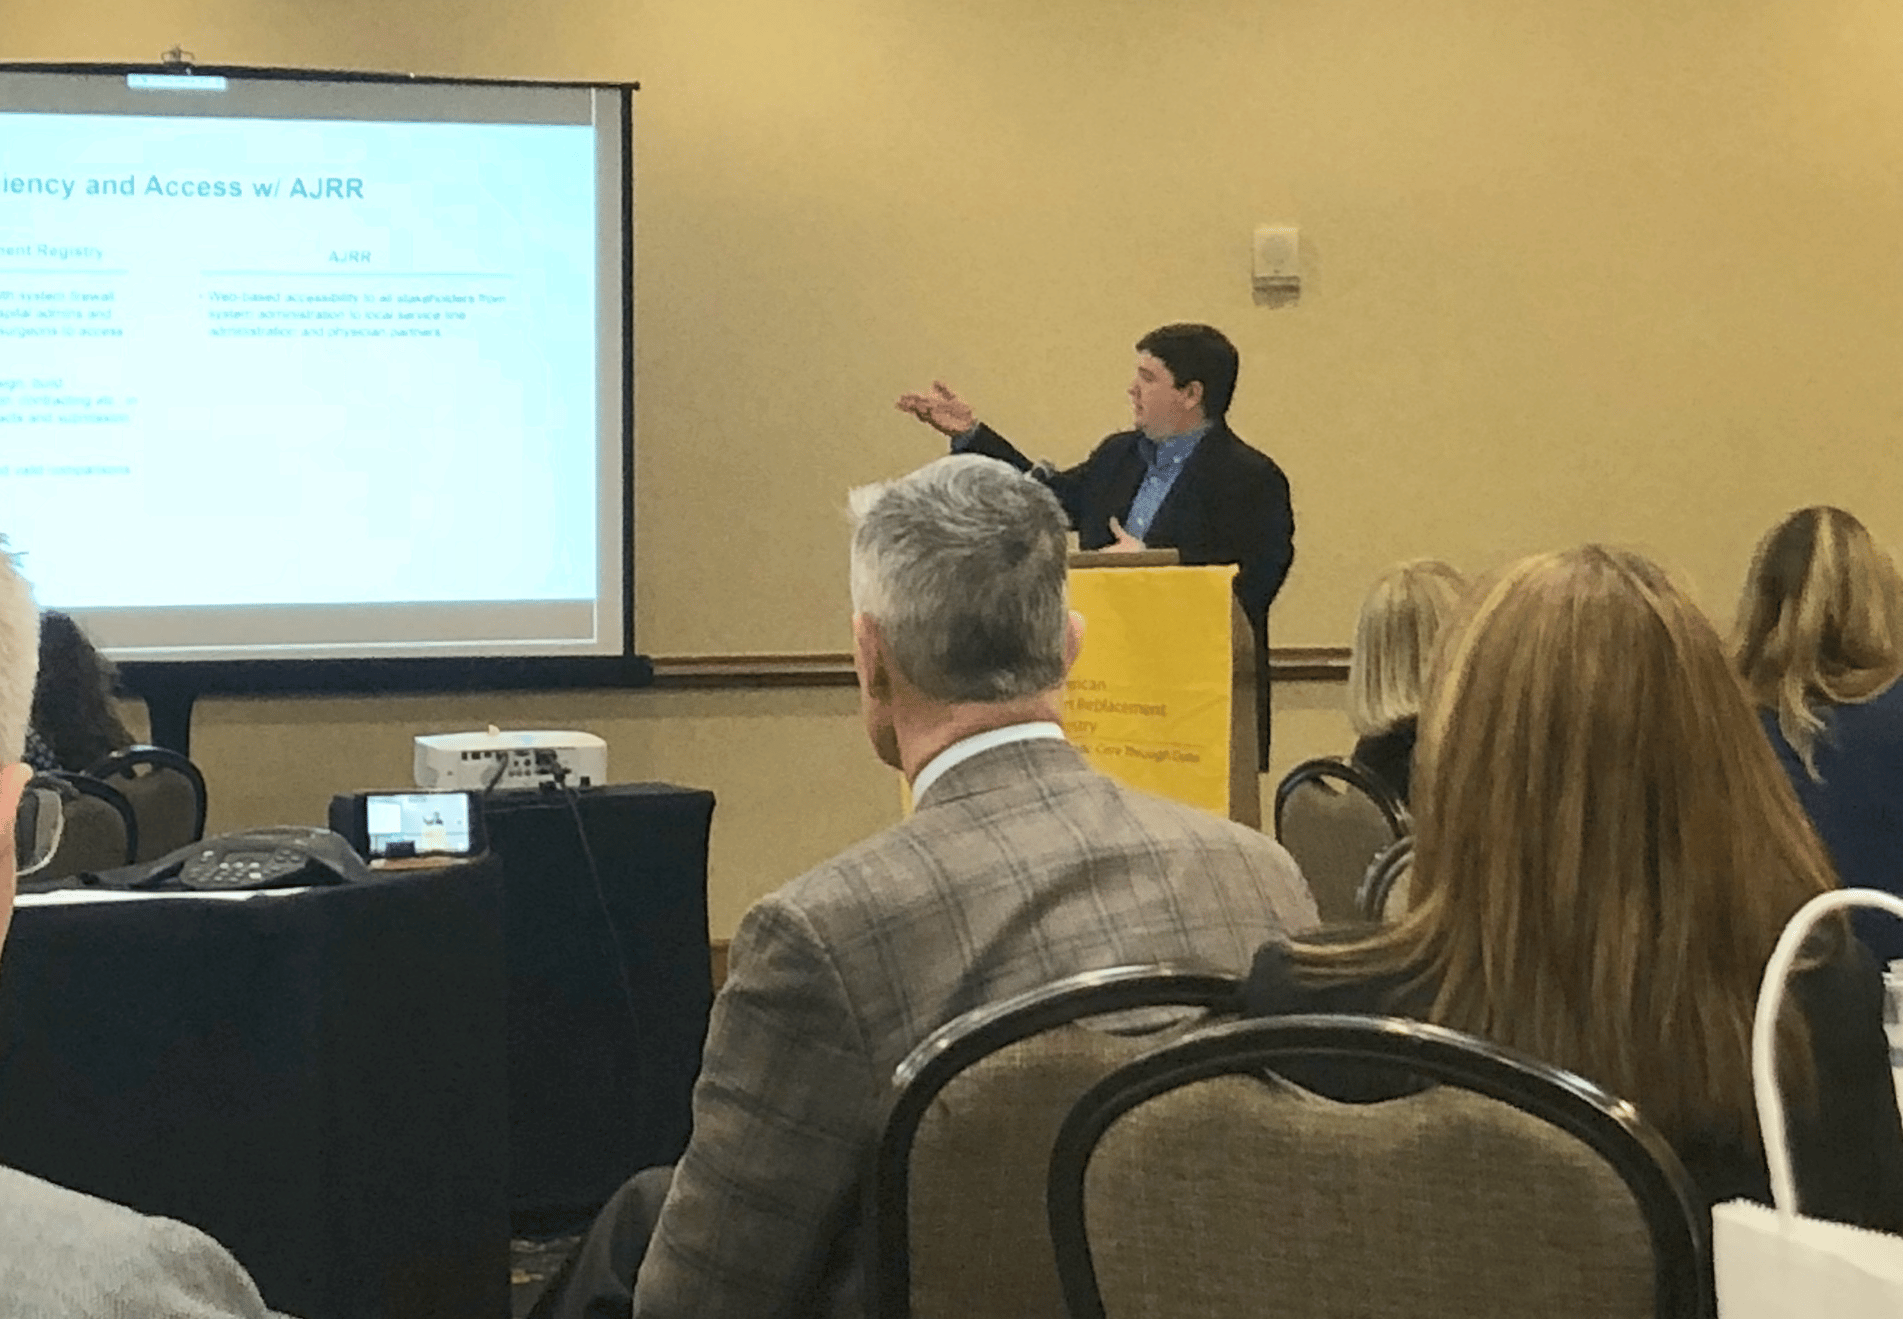 Kevin Fleming's presentation at the 2018 In-person Unet Meeting